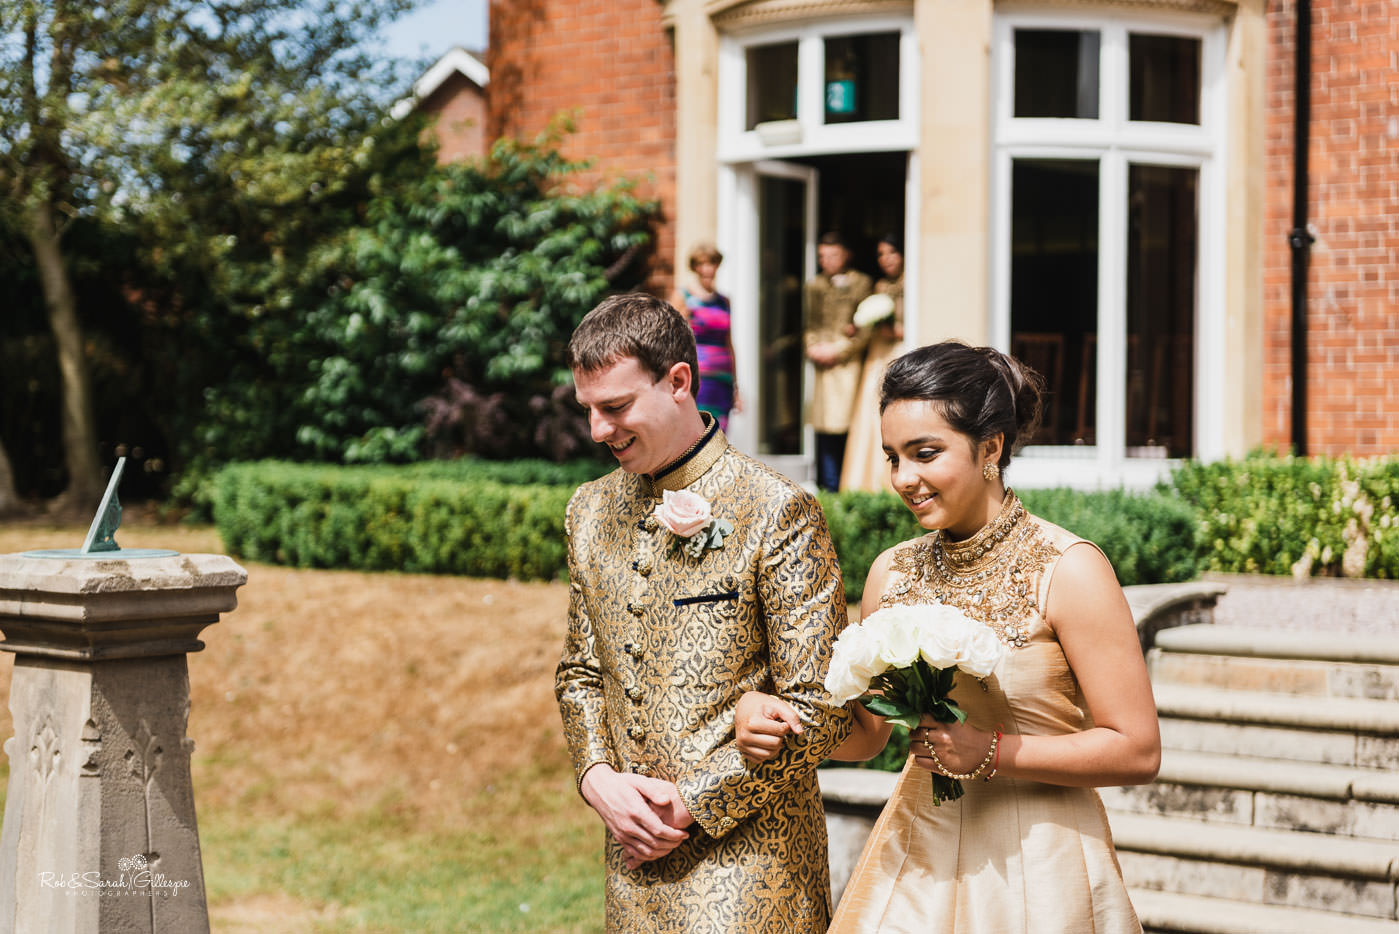 Outdoor wedding ceremony at Pendrell Hall